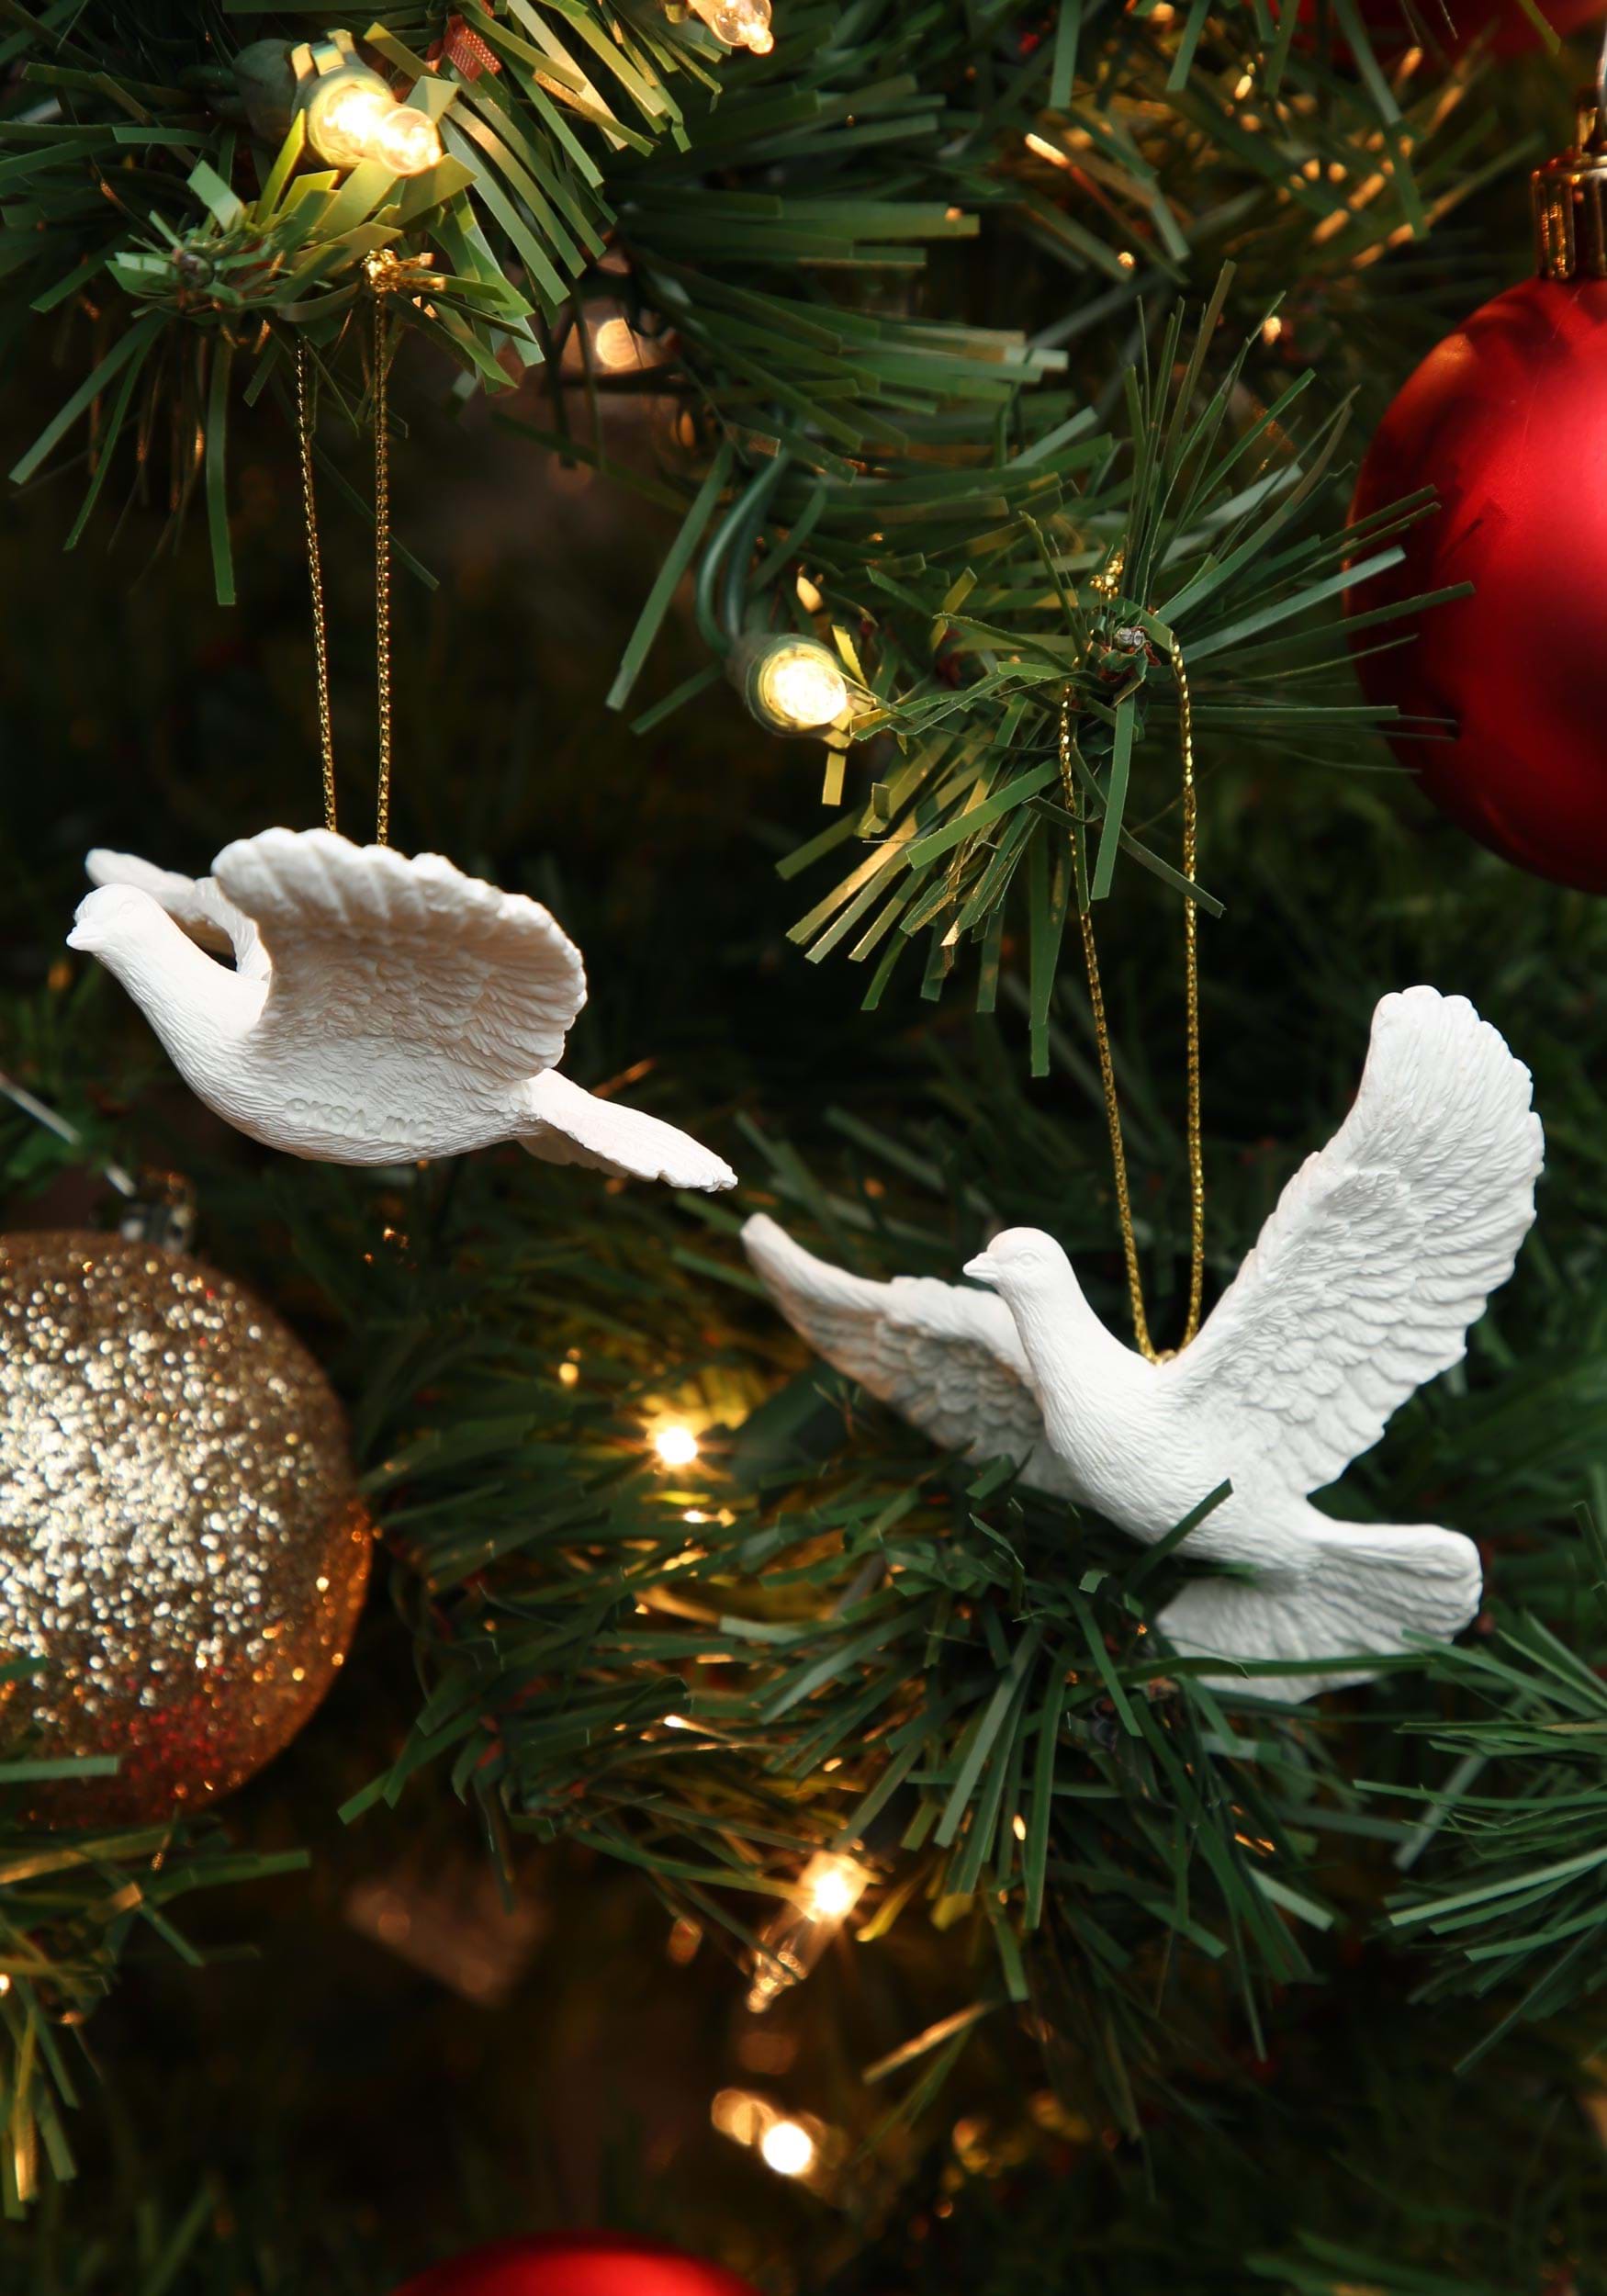 Pack of 30 Dove of Peace hanging ornament Christmas Holiday decorations/favors  - Walmart.com